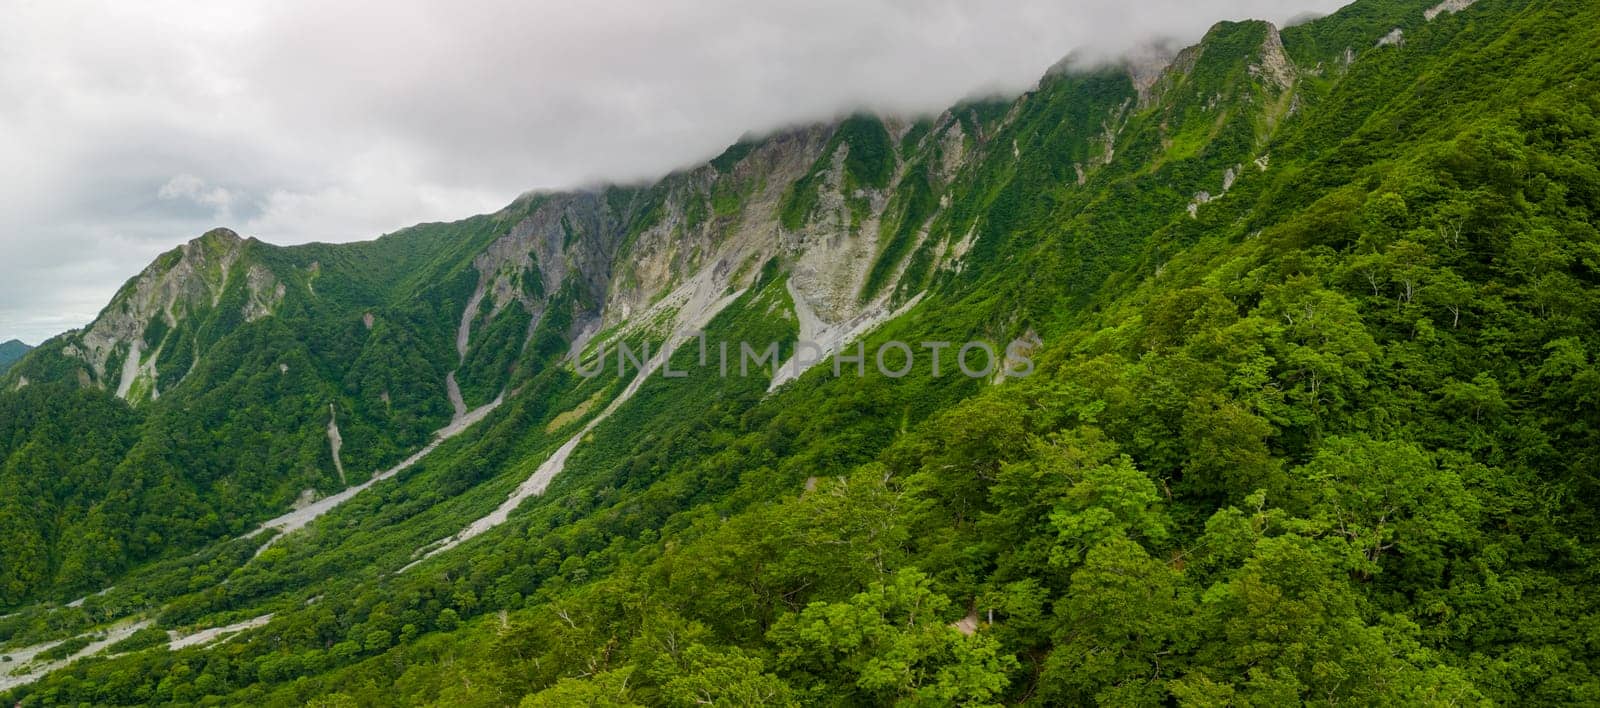 View of rock landslides on steep forested slope of volcanic mountain by Osaze